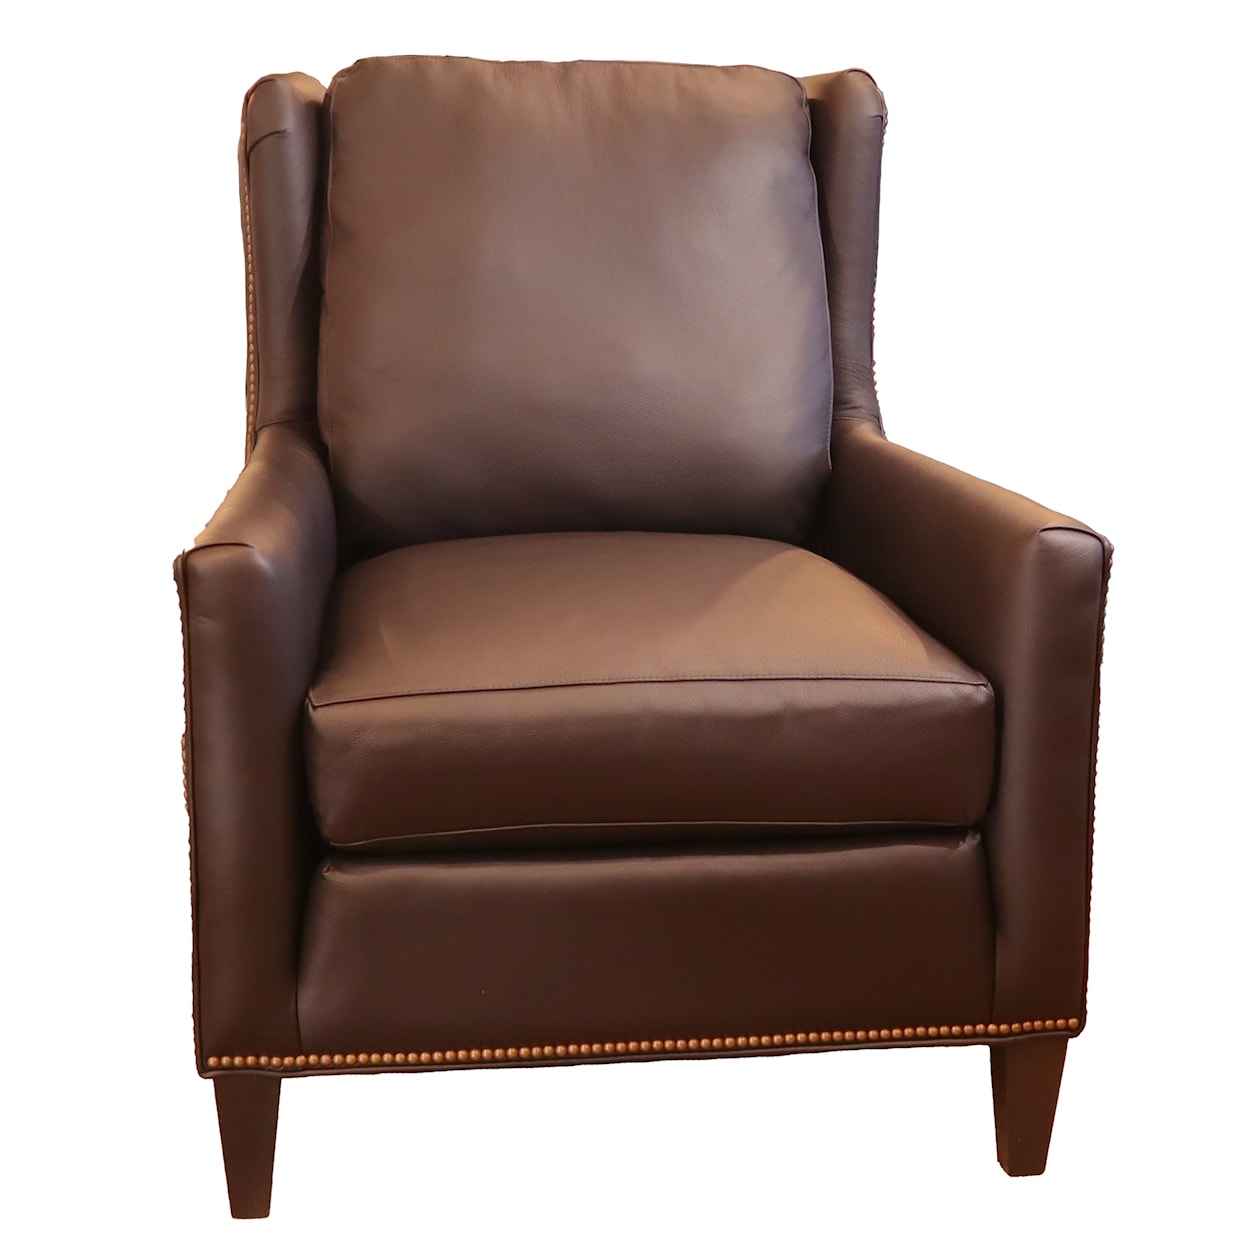 Smith Brothers 270 Transitional Chair 270L-30